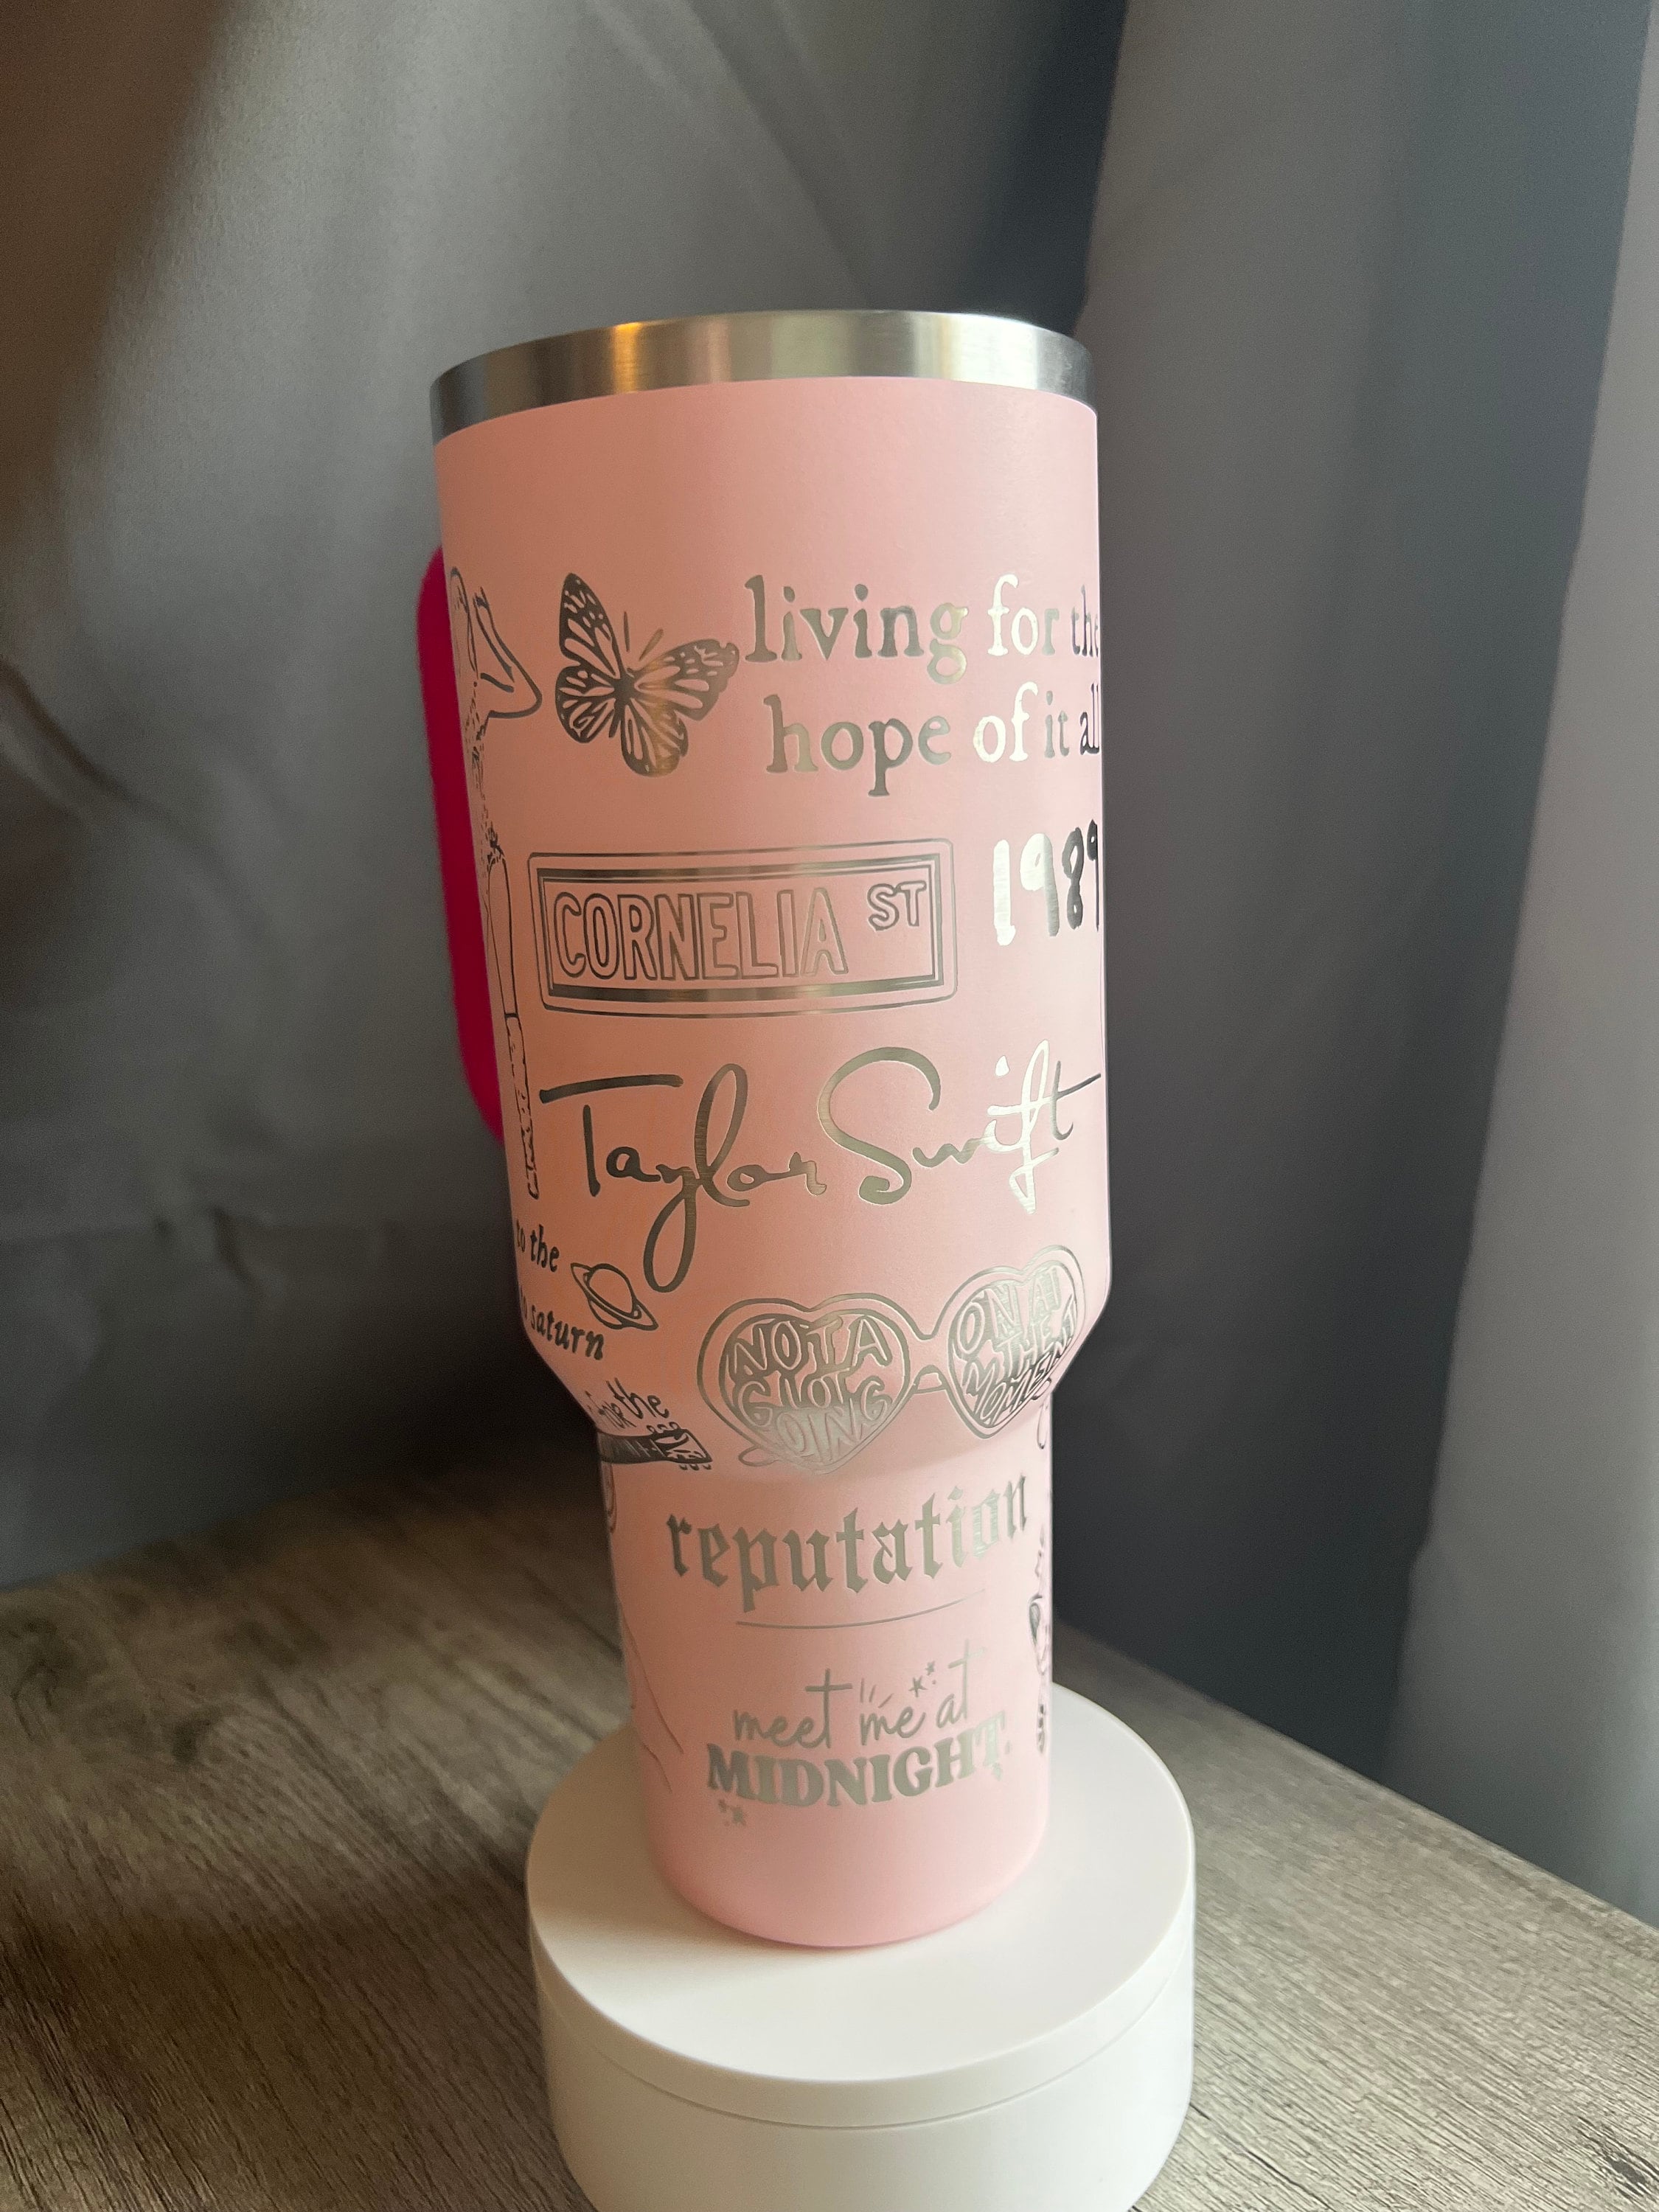 Custom Name Reputation Engraved Taylor Swift 40oz Stanley Tumbler - The  best gifts are made with Love